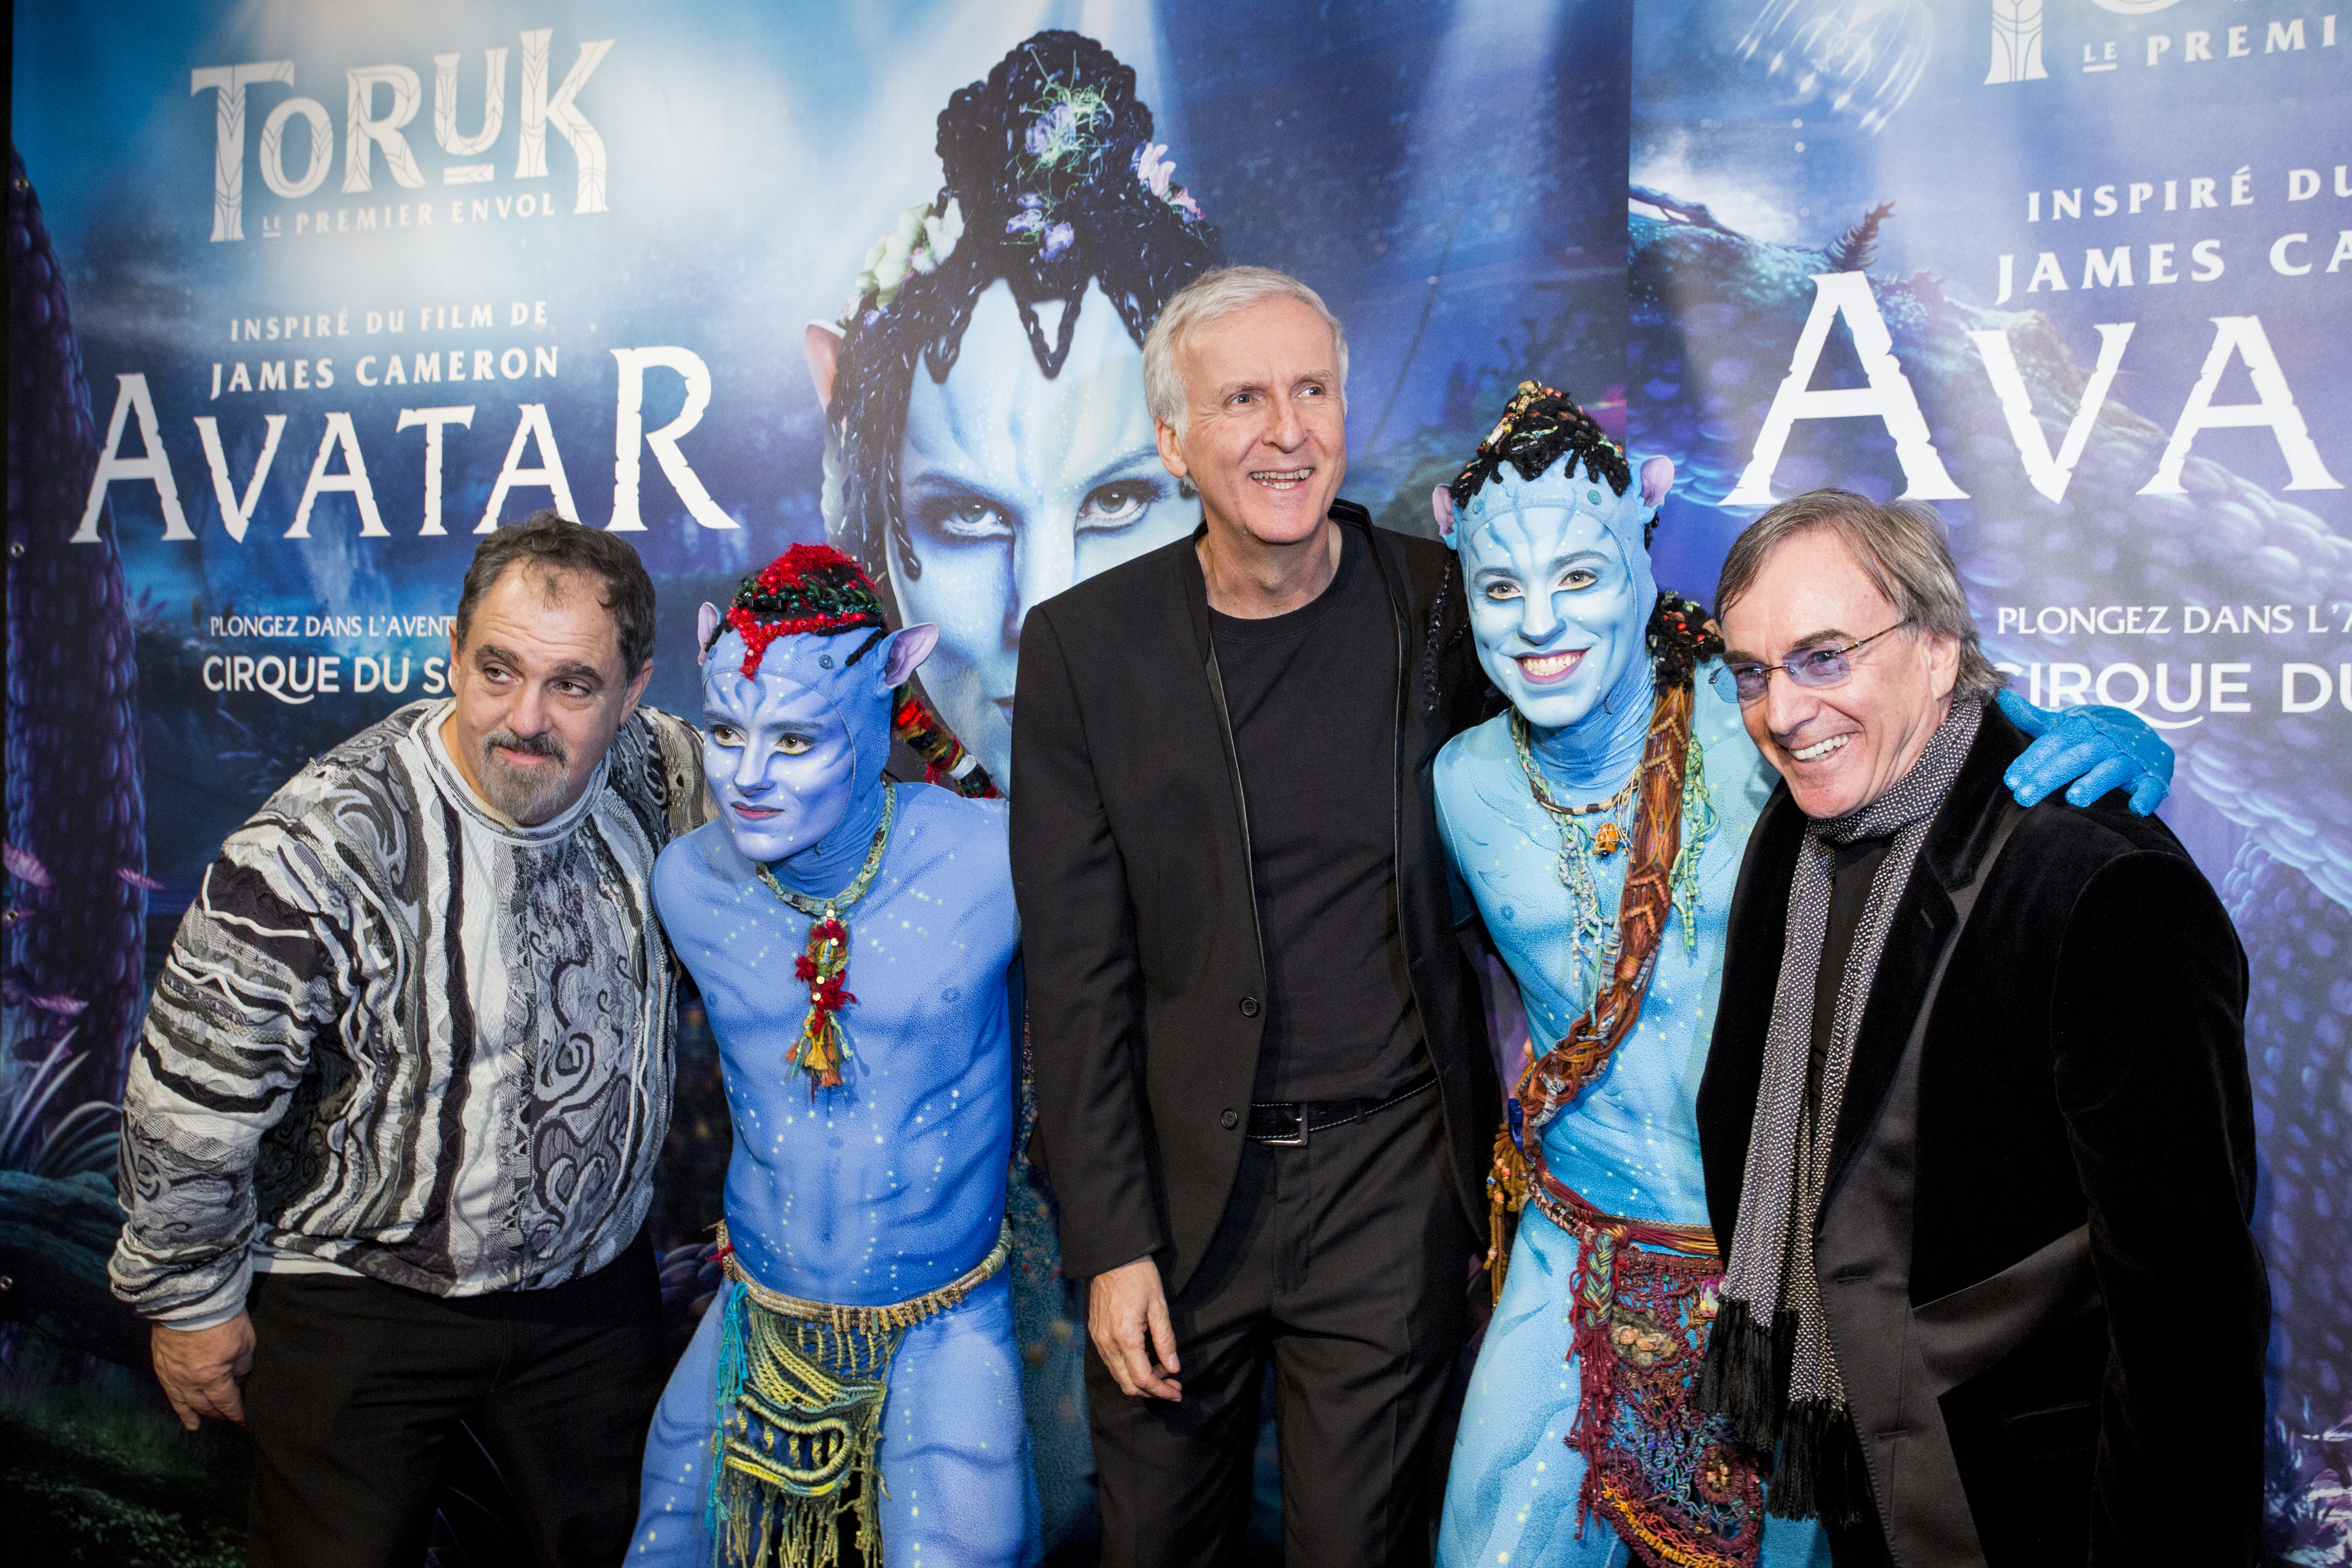 Cirque du Soleil Presents the World Premiere of TORUK – The First Flight written and directed by Michel Lemieux and Victor Pilon Inspired by James Cameron’s AVATAR 1 Cirque du Soleil officially premiered its new arena touring show inspired by James Cameron’s record-breaking movie AVATAR, TORUK – The First Flight, on Monday, December 21 at the Bell Centre in Montreal.  The show will be presented there until January 3 and will then continue touring in arenas around the world.